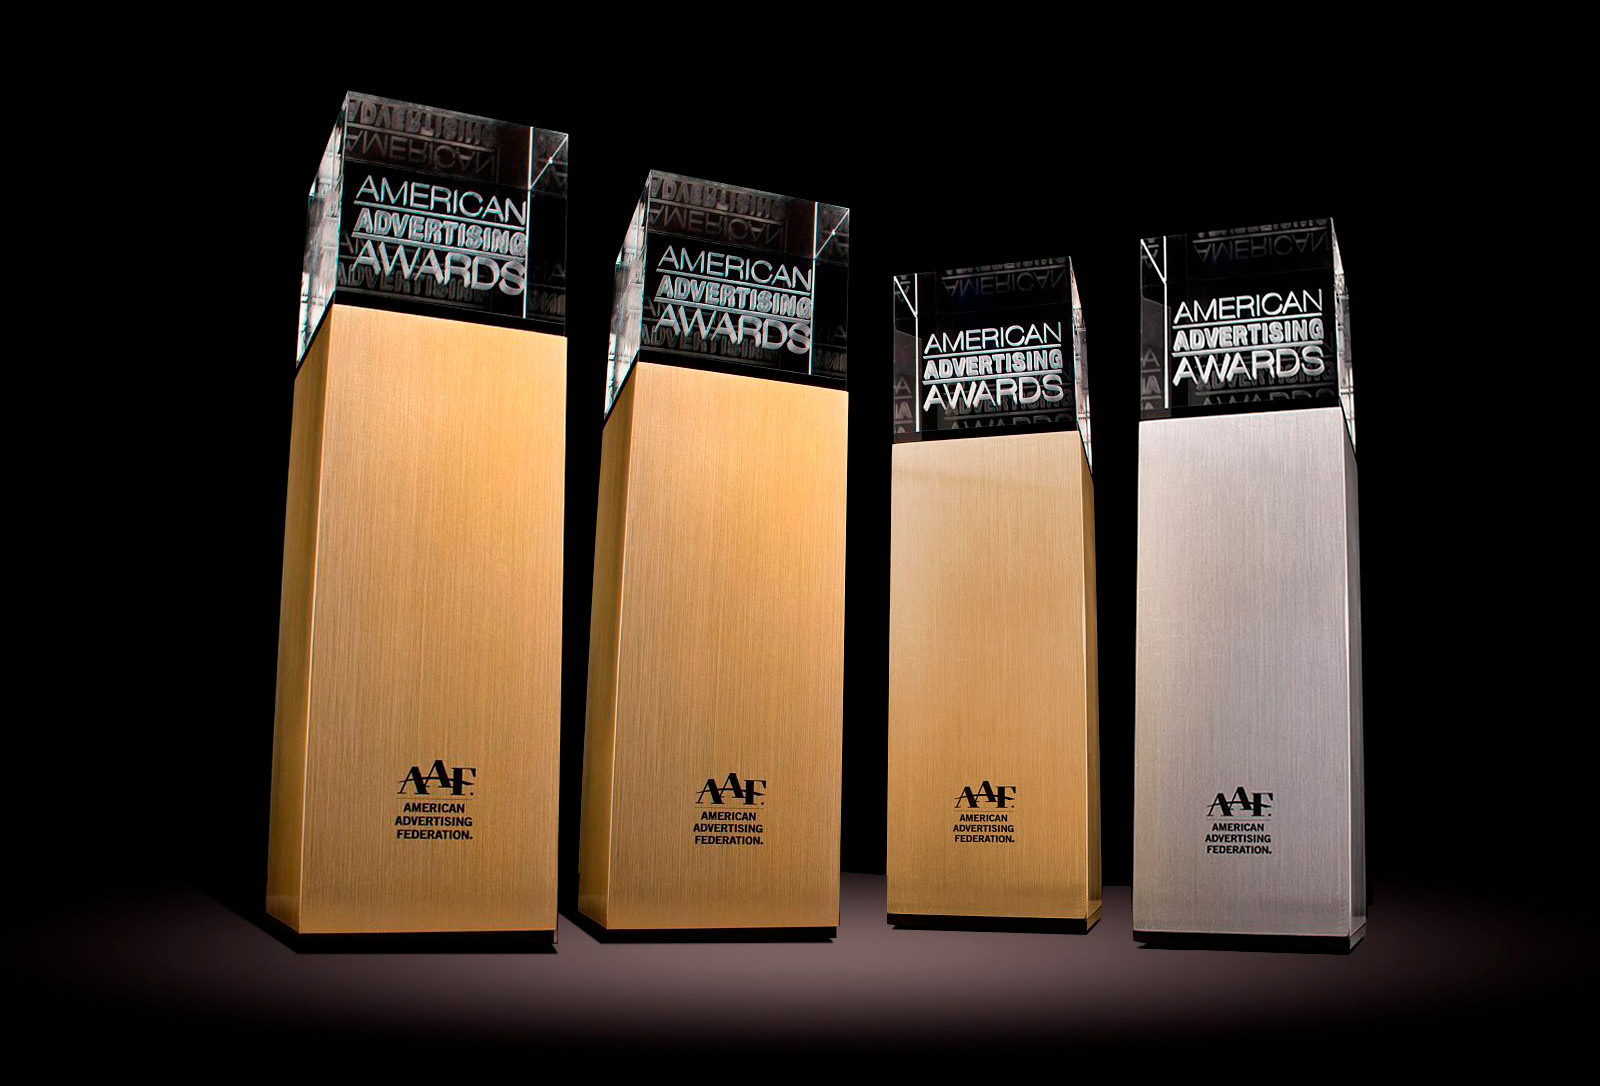 National ADDY awards trophies